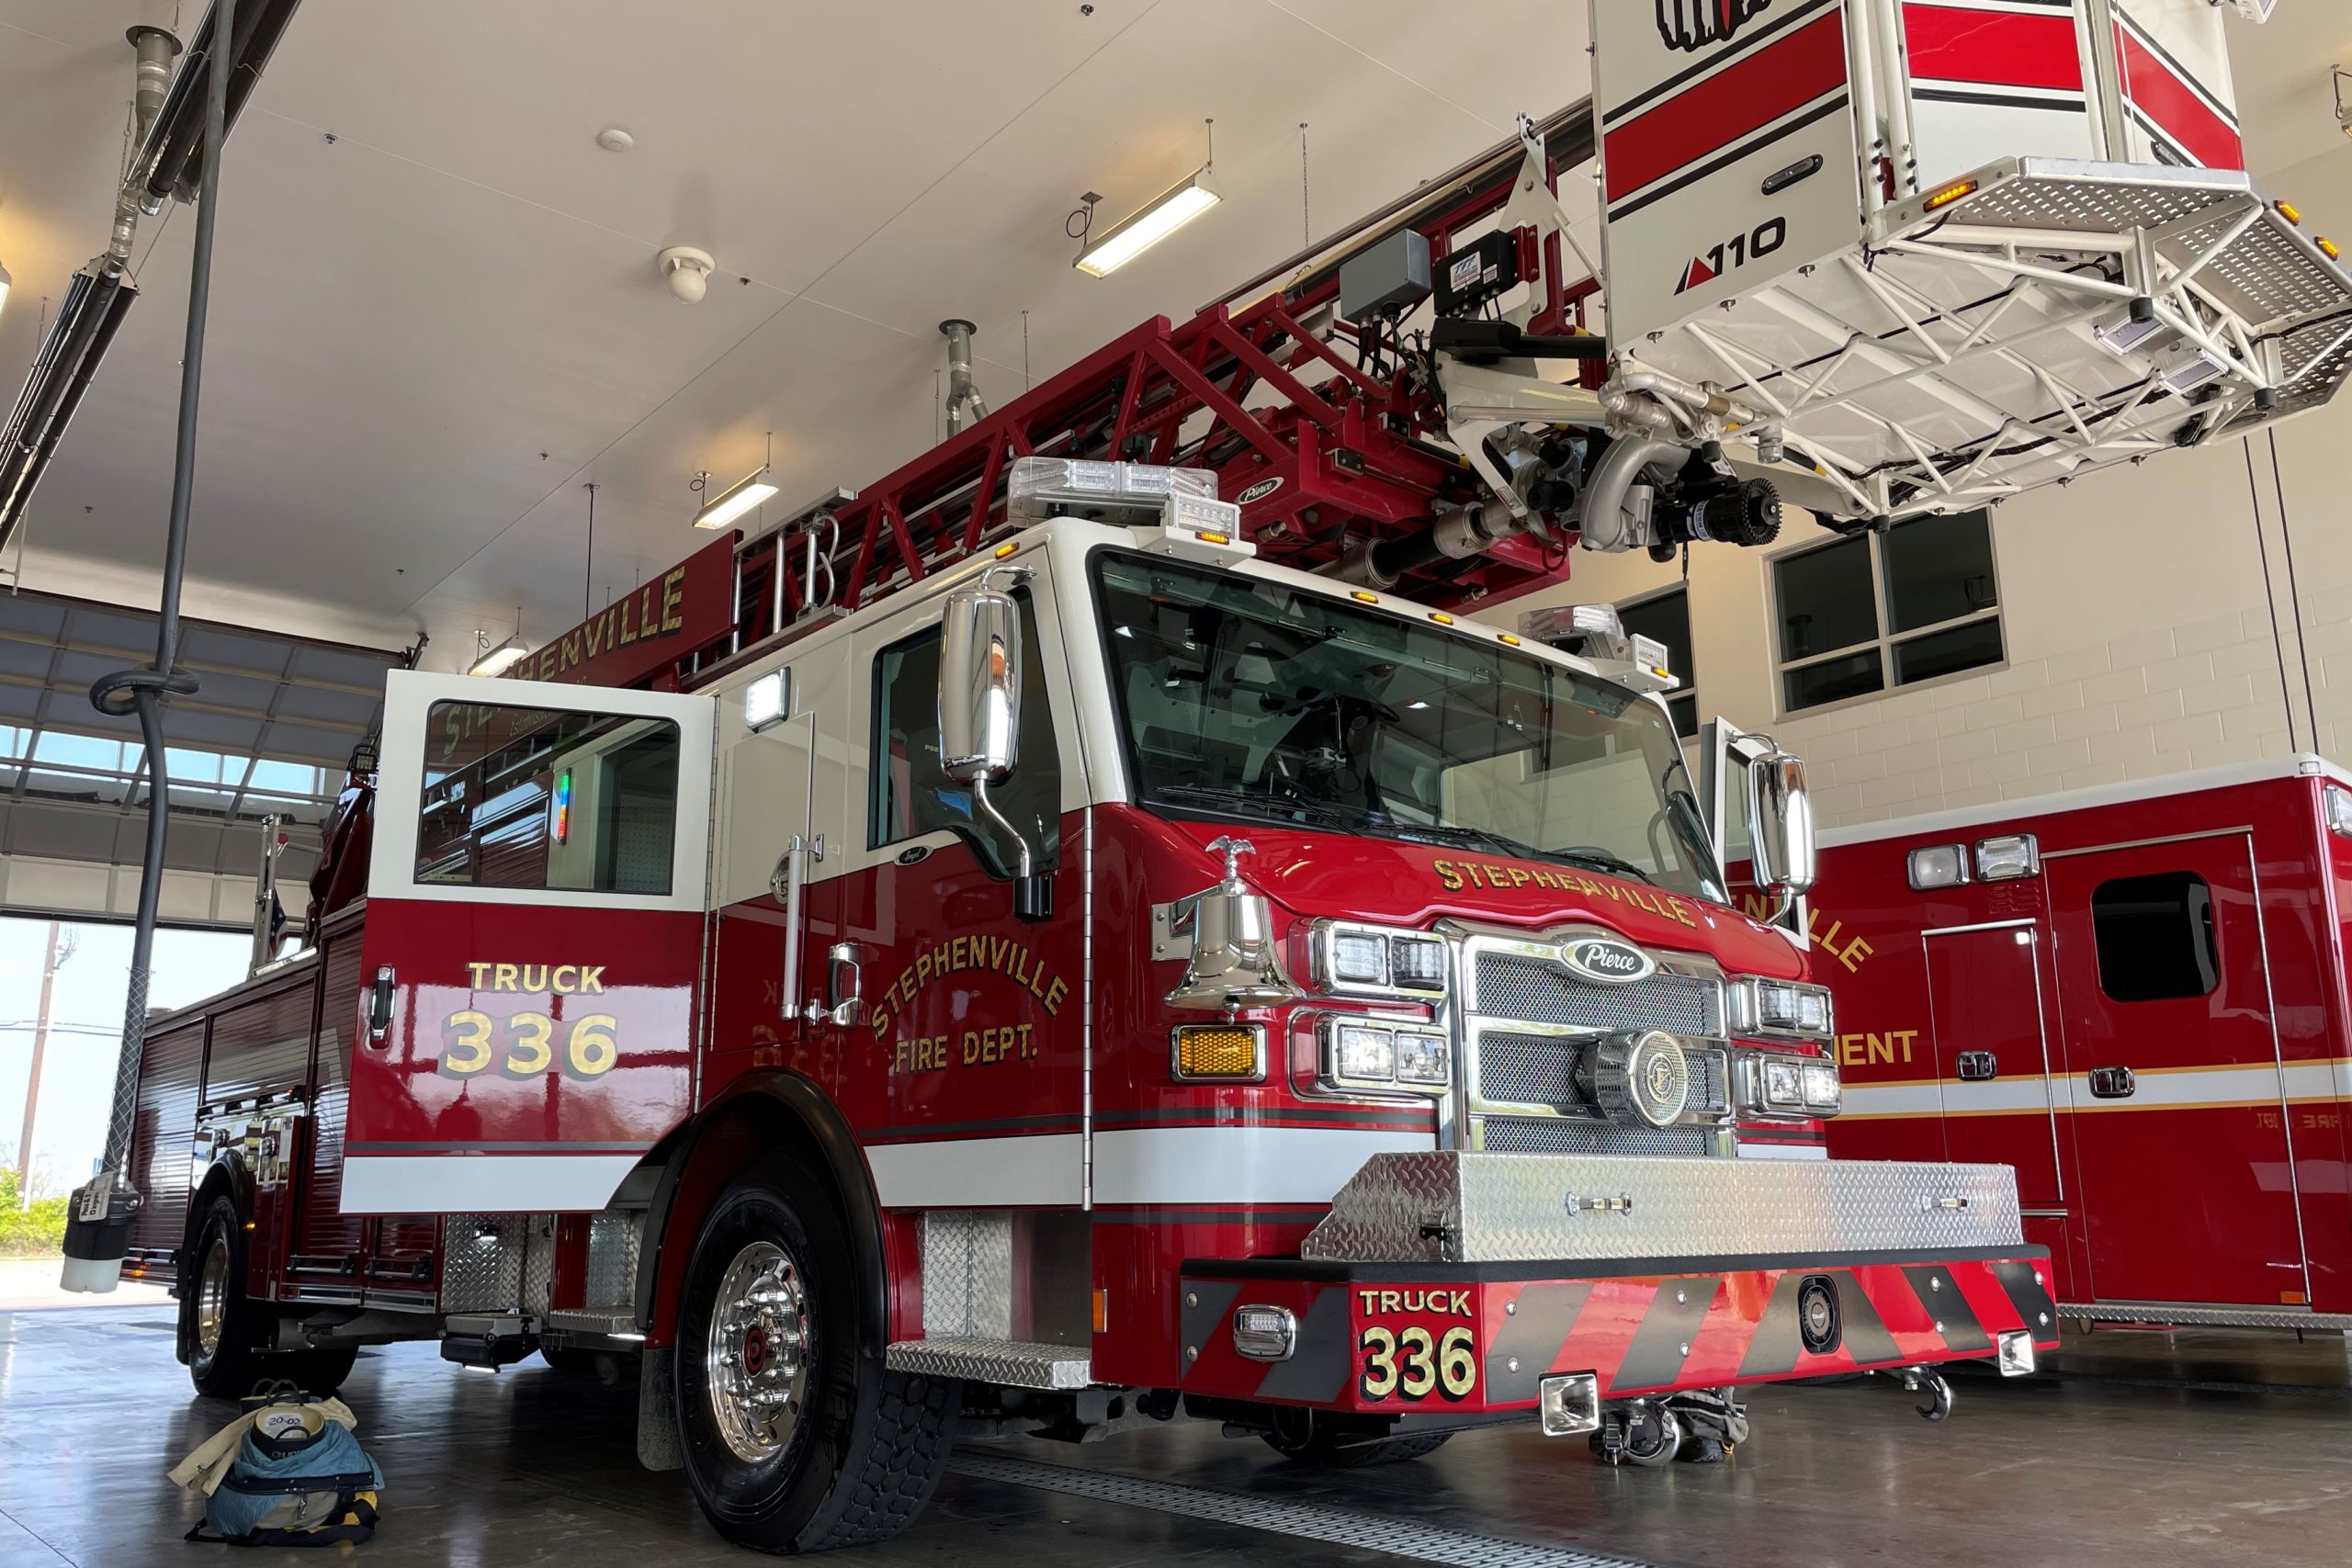 Factors to Consider When Selecting Records Management Software For Fire Departments